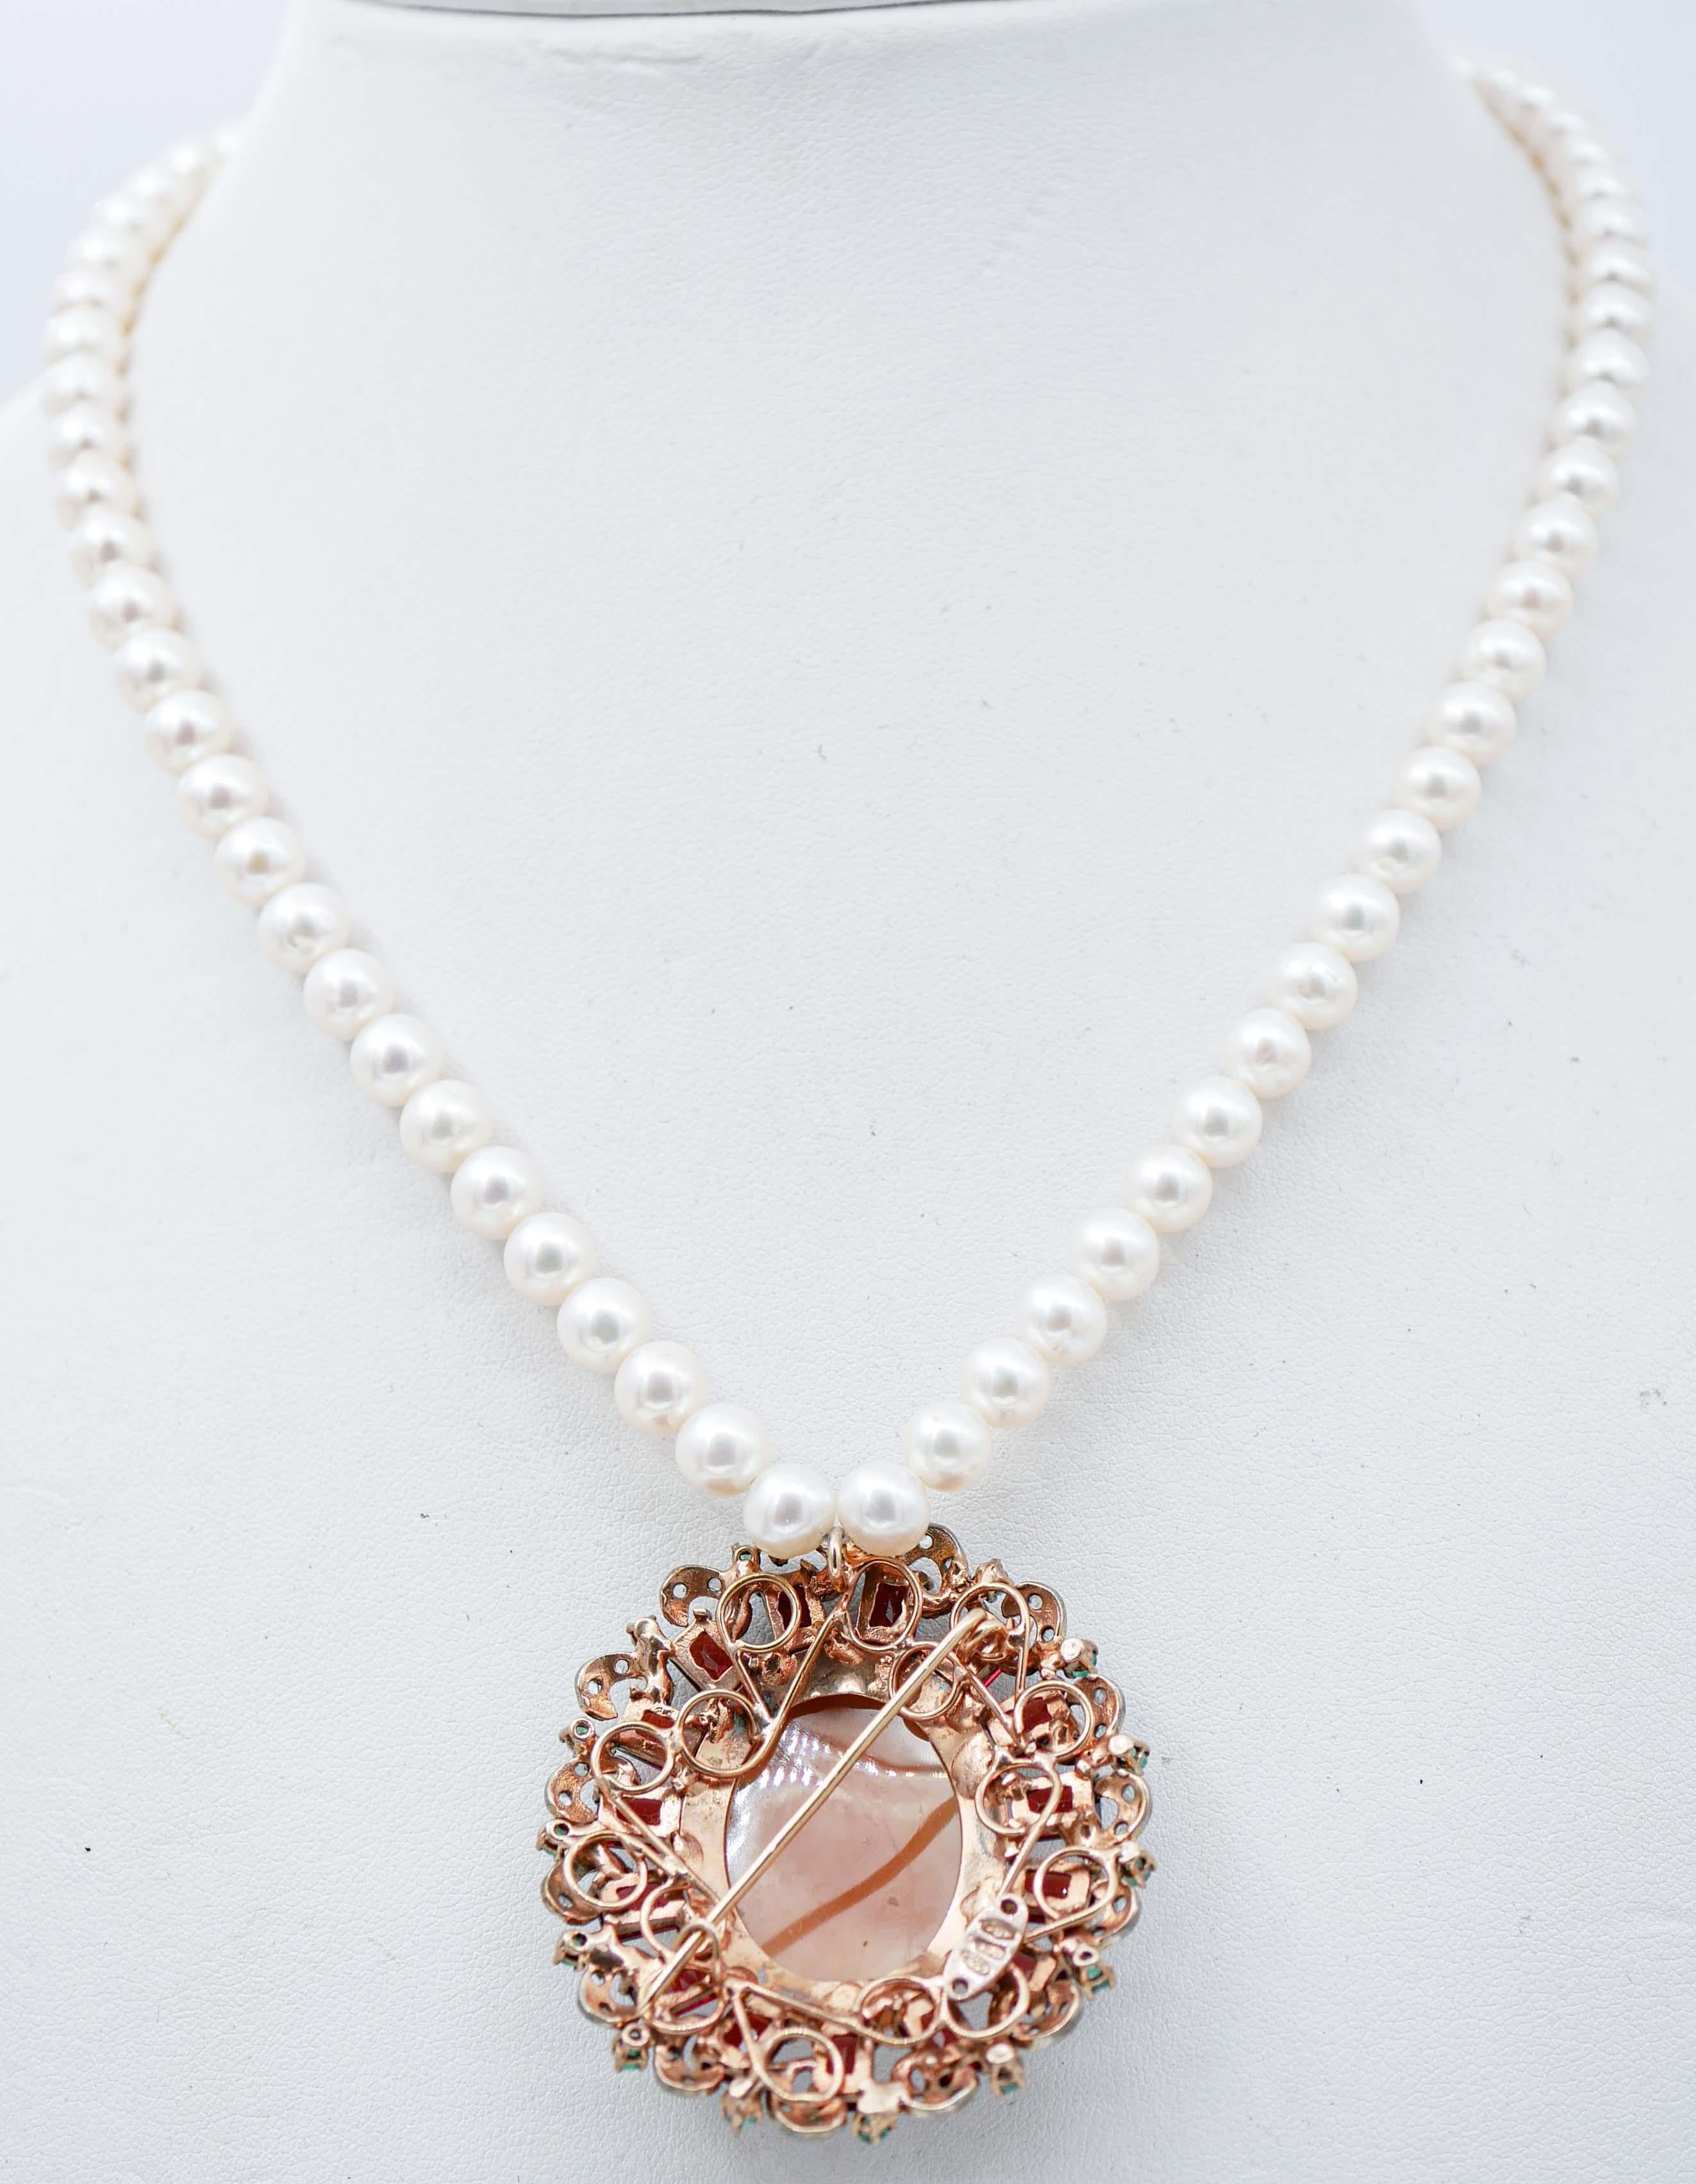 Mixed Cut Cameo, Garnets, Emeralds, Diamonds, Pearls,  Gold and Silver Pendant Necklace For Sale